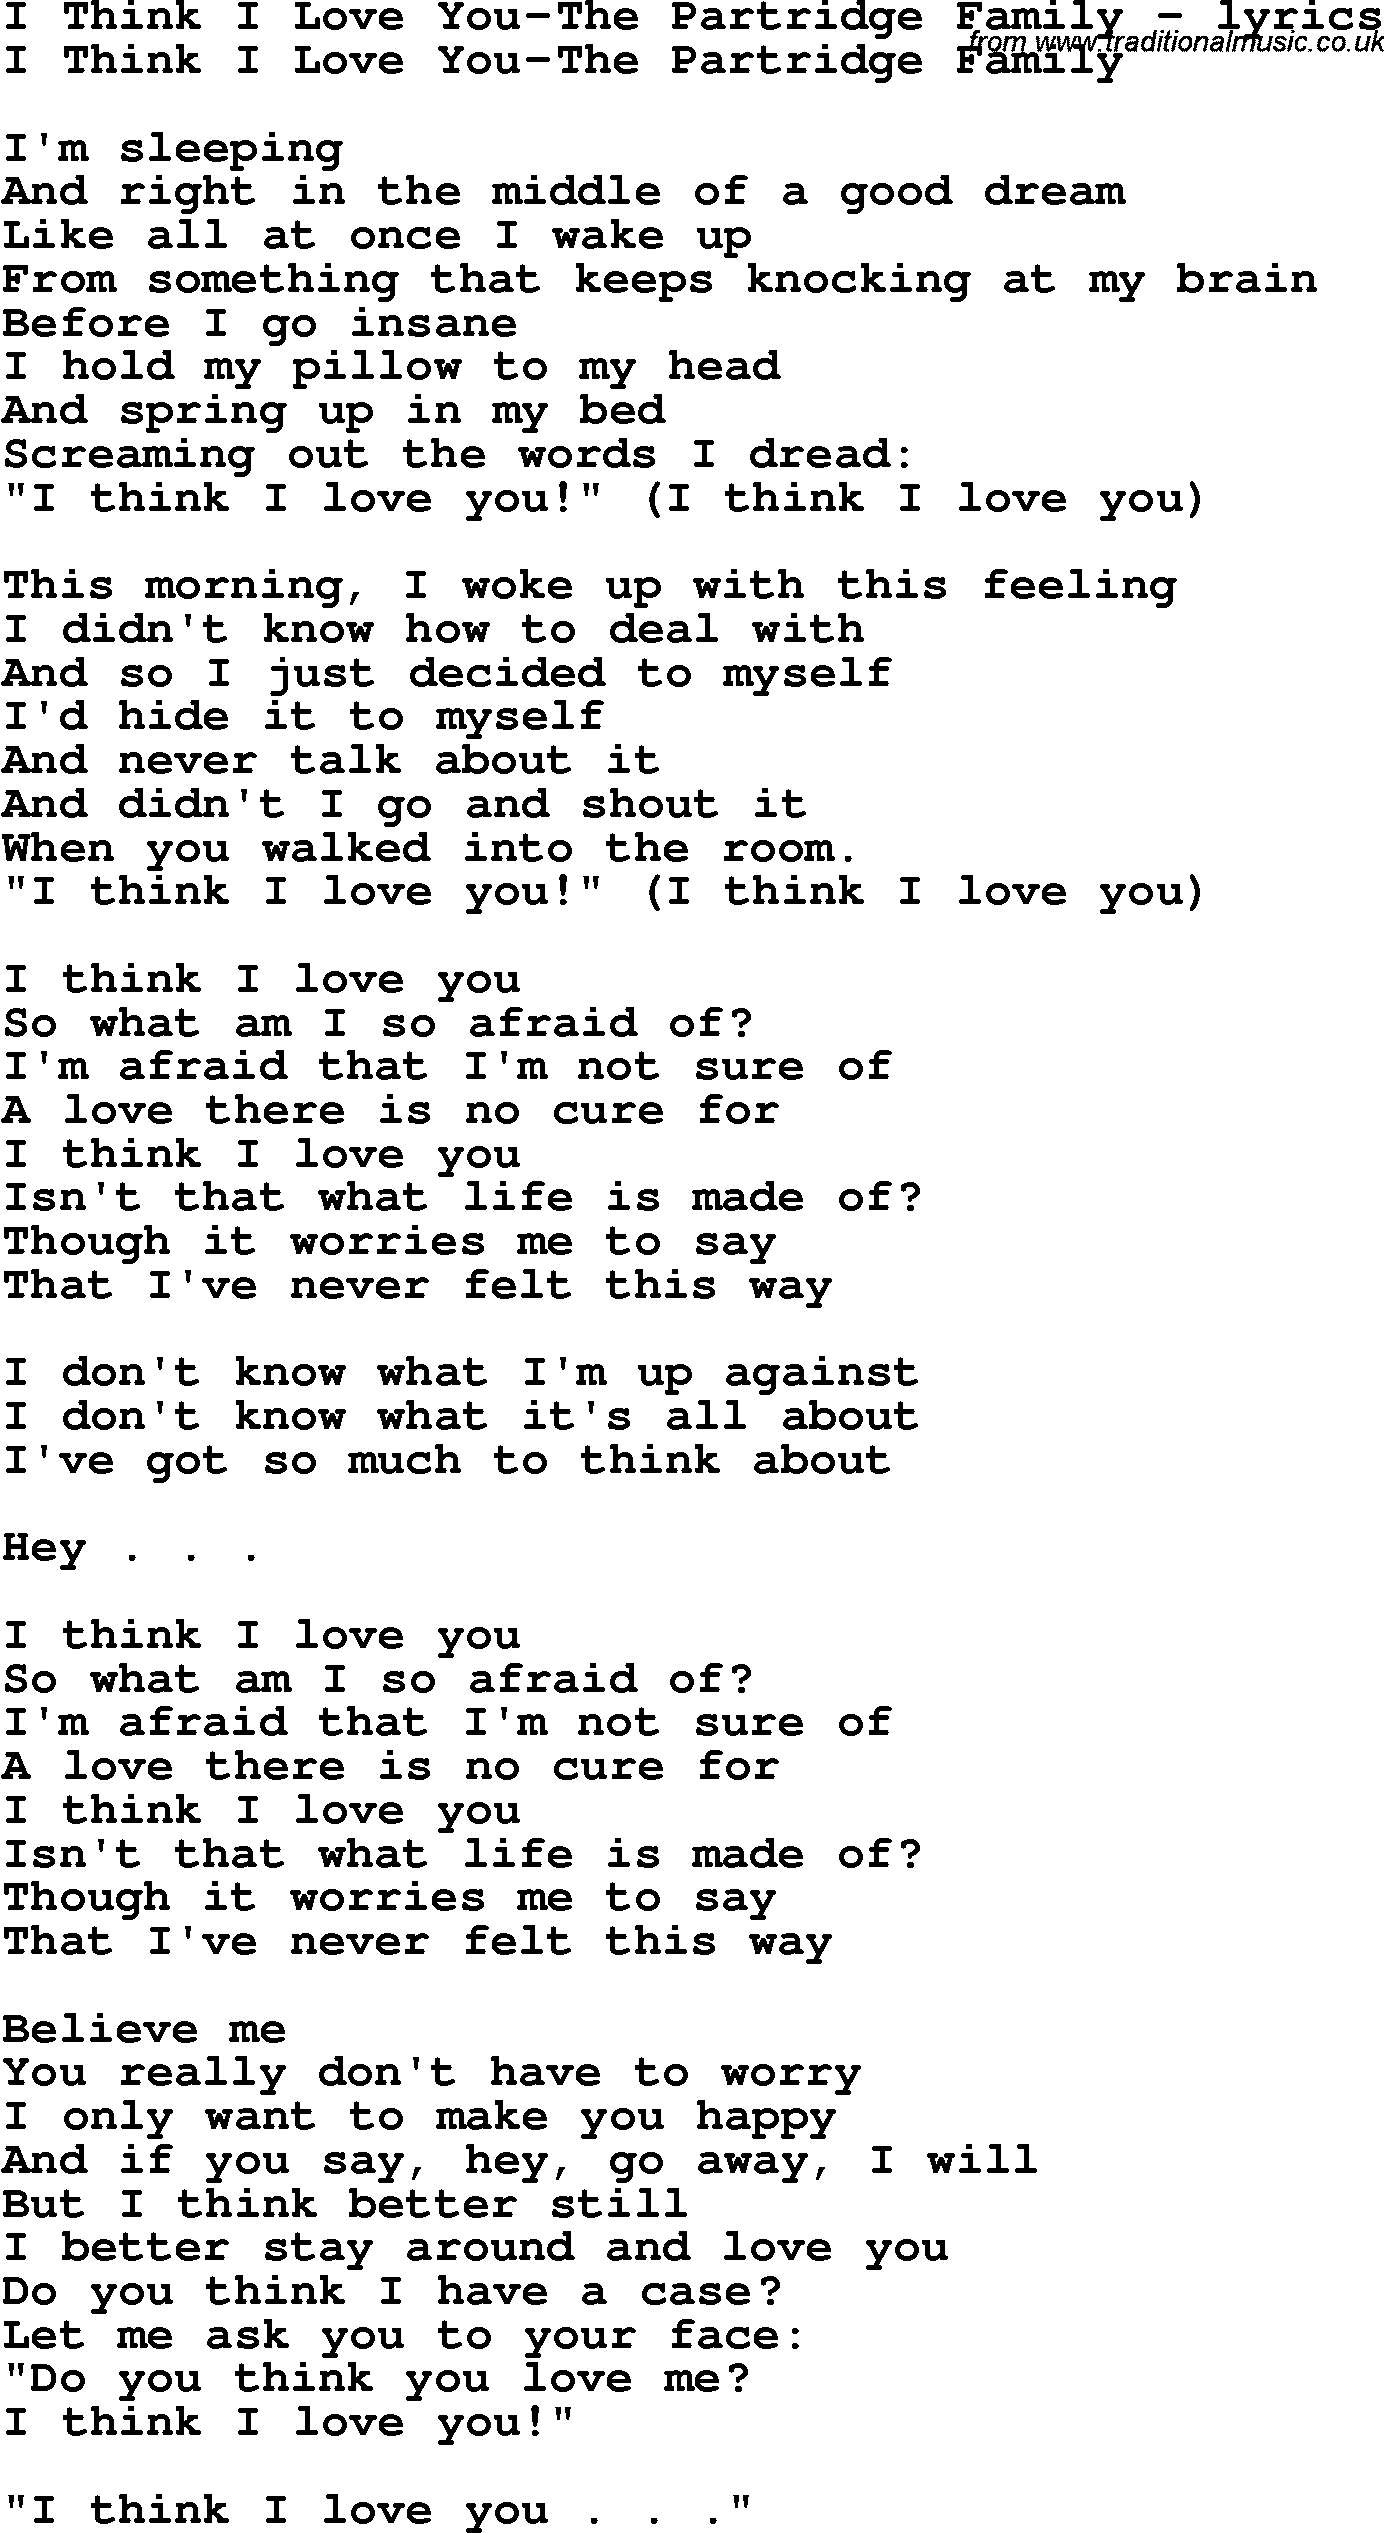 Love Song Lyrics for: I Think I Love You-The Partridge Family